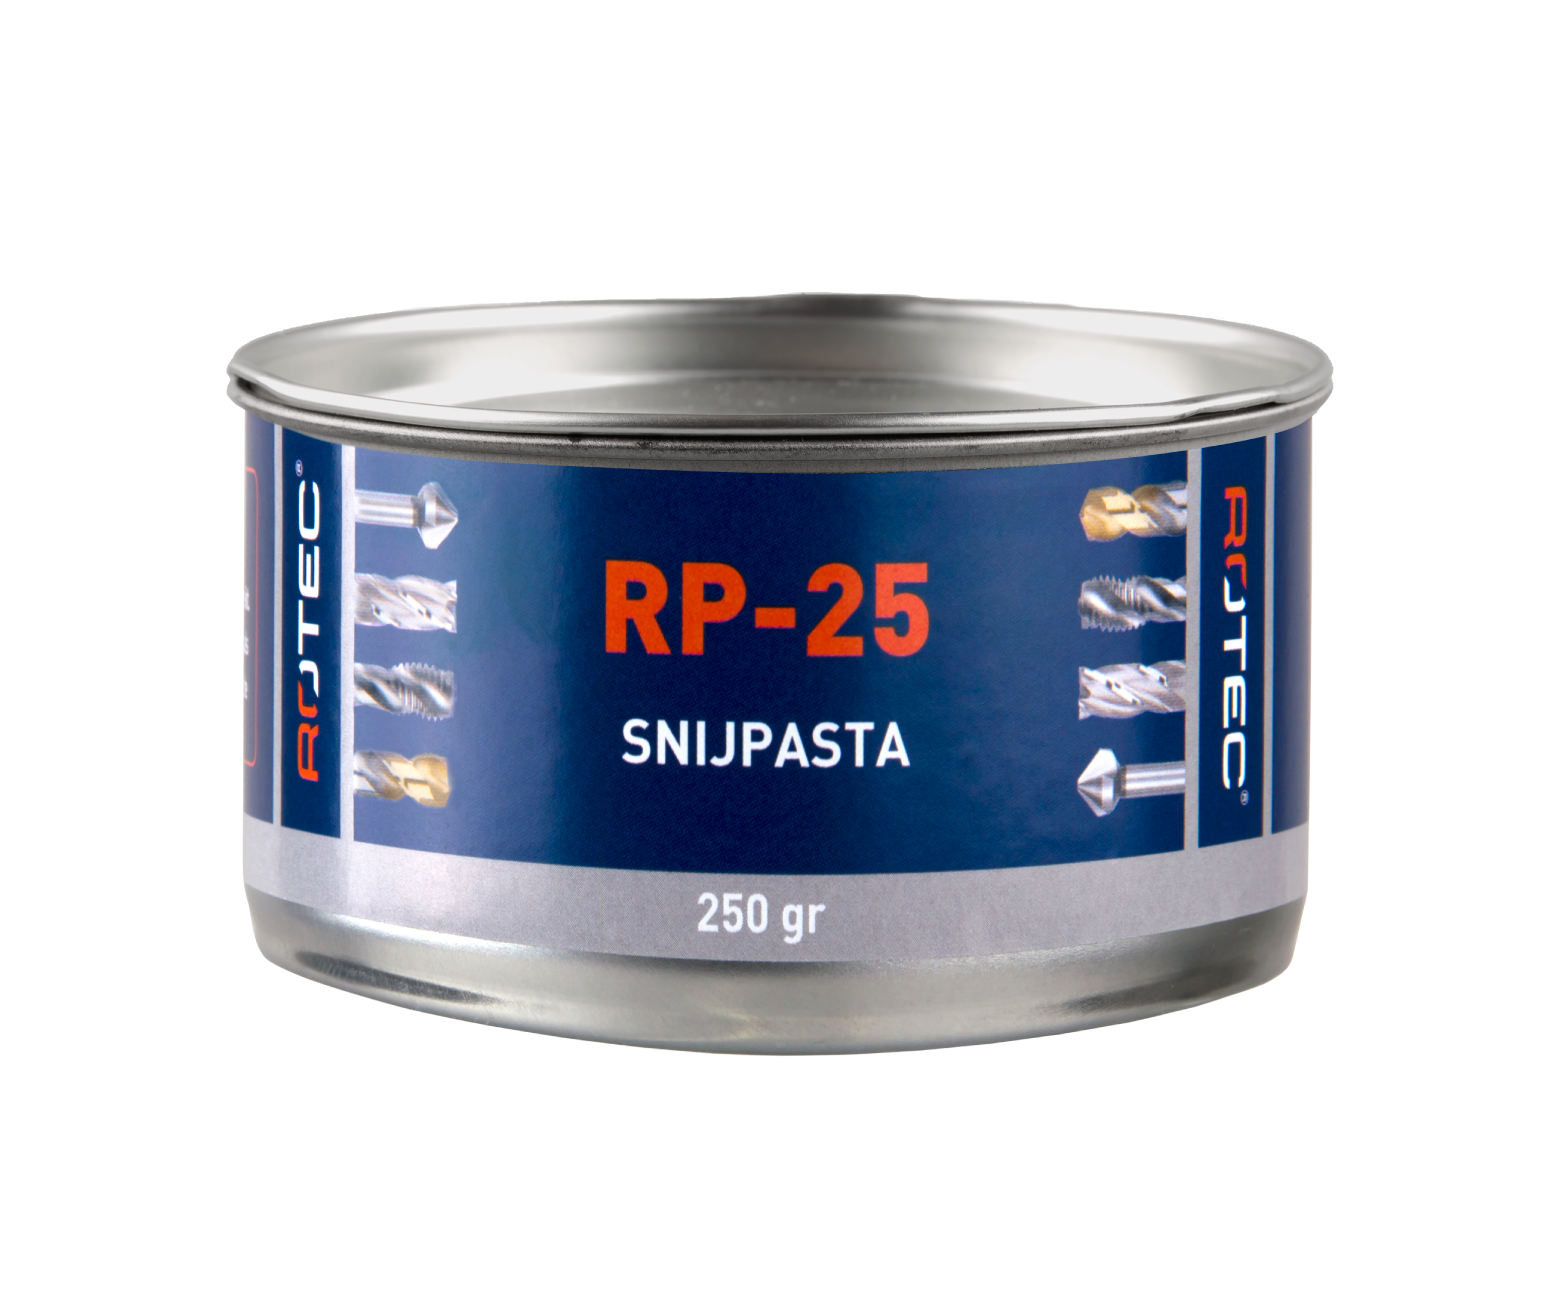 RP-25 cutting paste in tin can of 250 gram